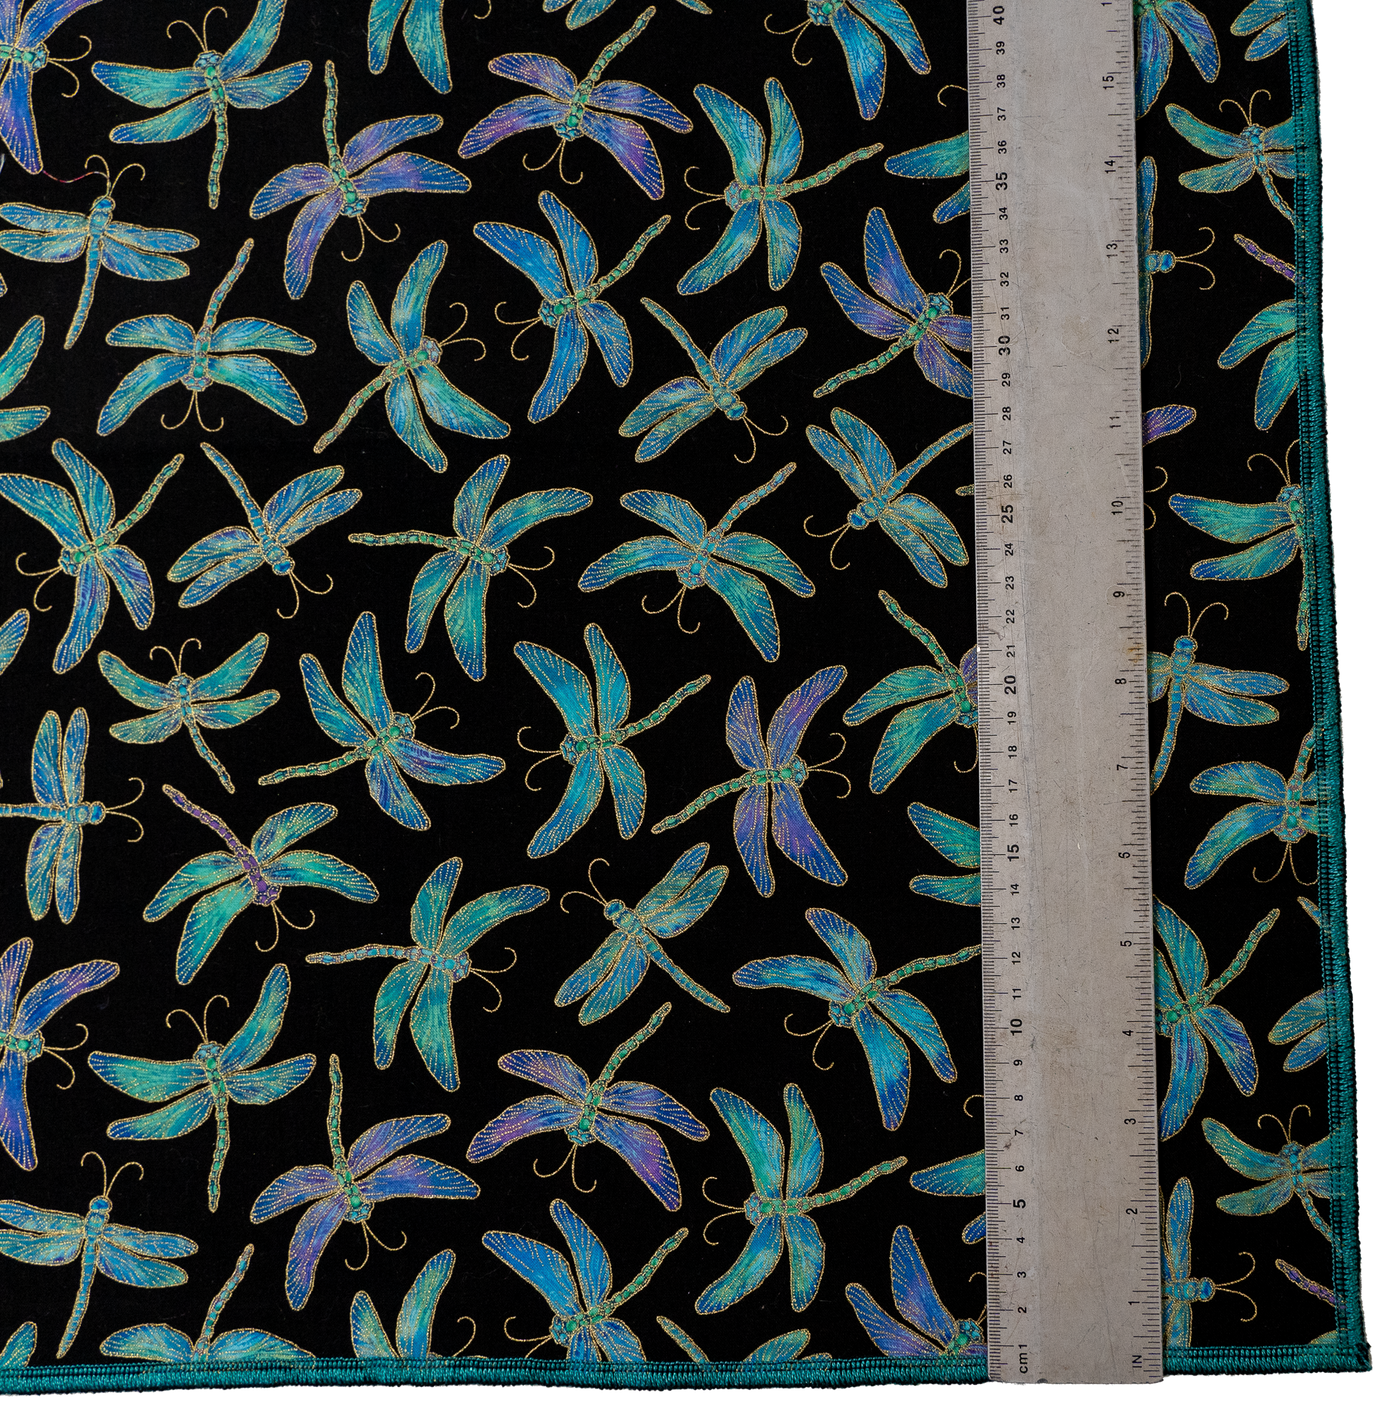 Handmade bandana with a beautiful dragonfly fabric, dragonflies in shades of blues, greens & purples